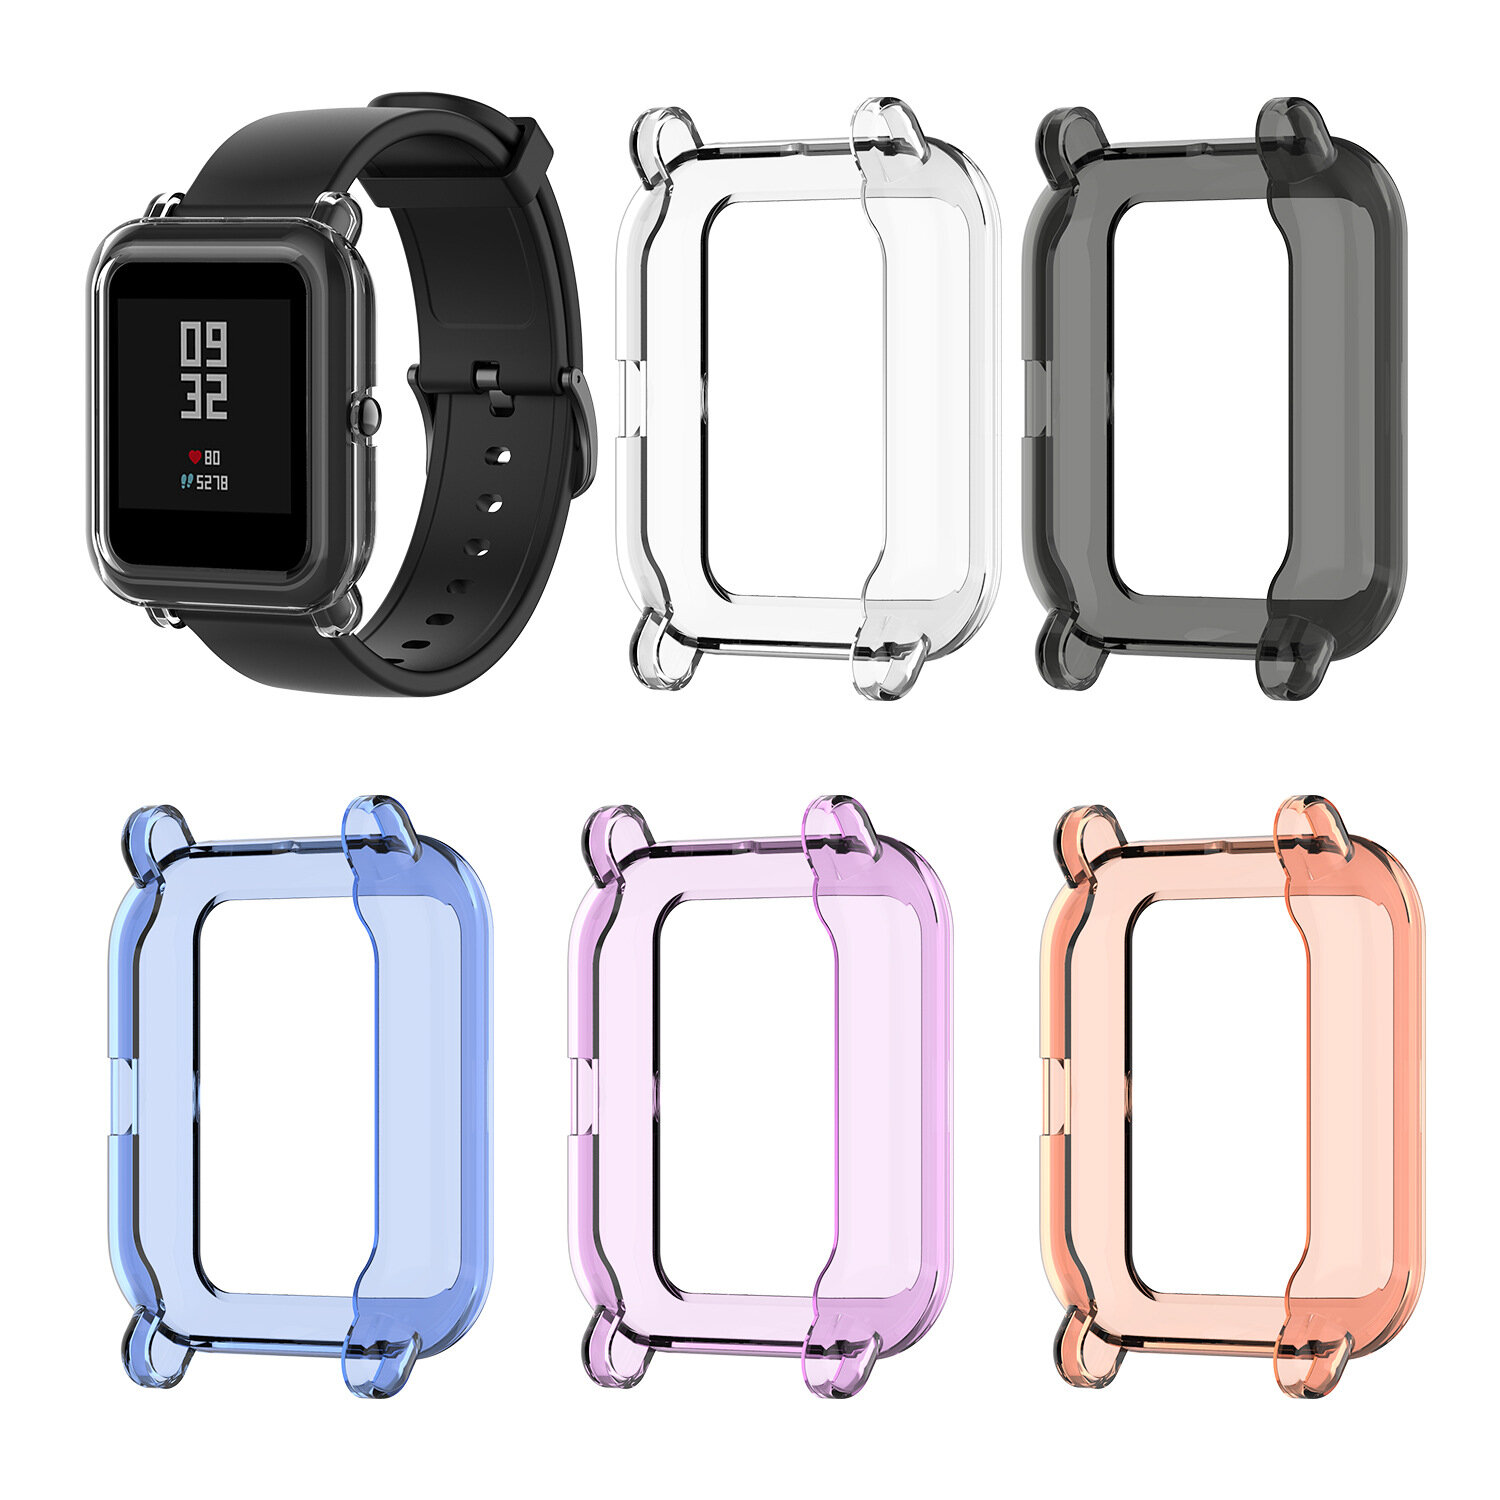 TPU Watch Case Watch Cover Case Cover voor Amazfit Bip 1S